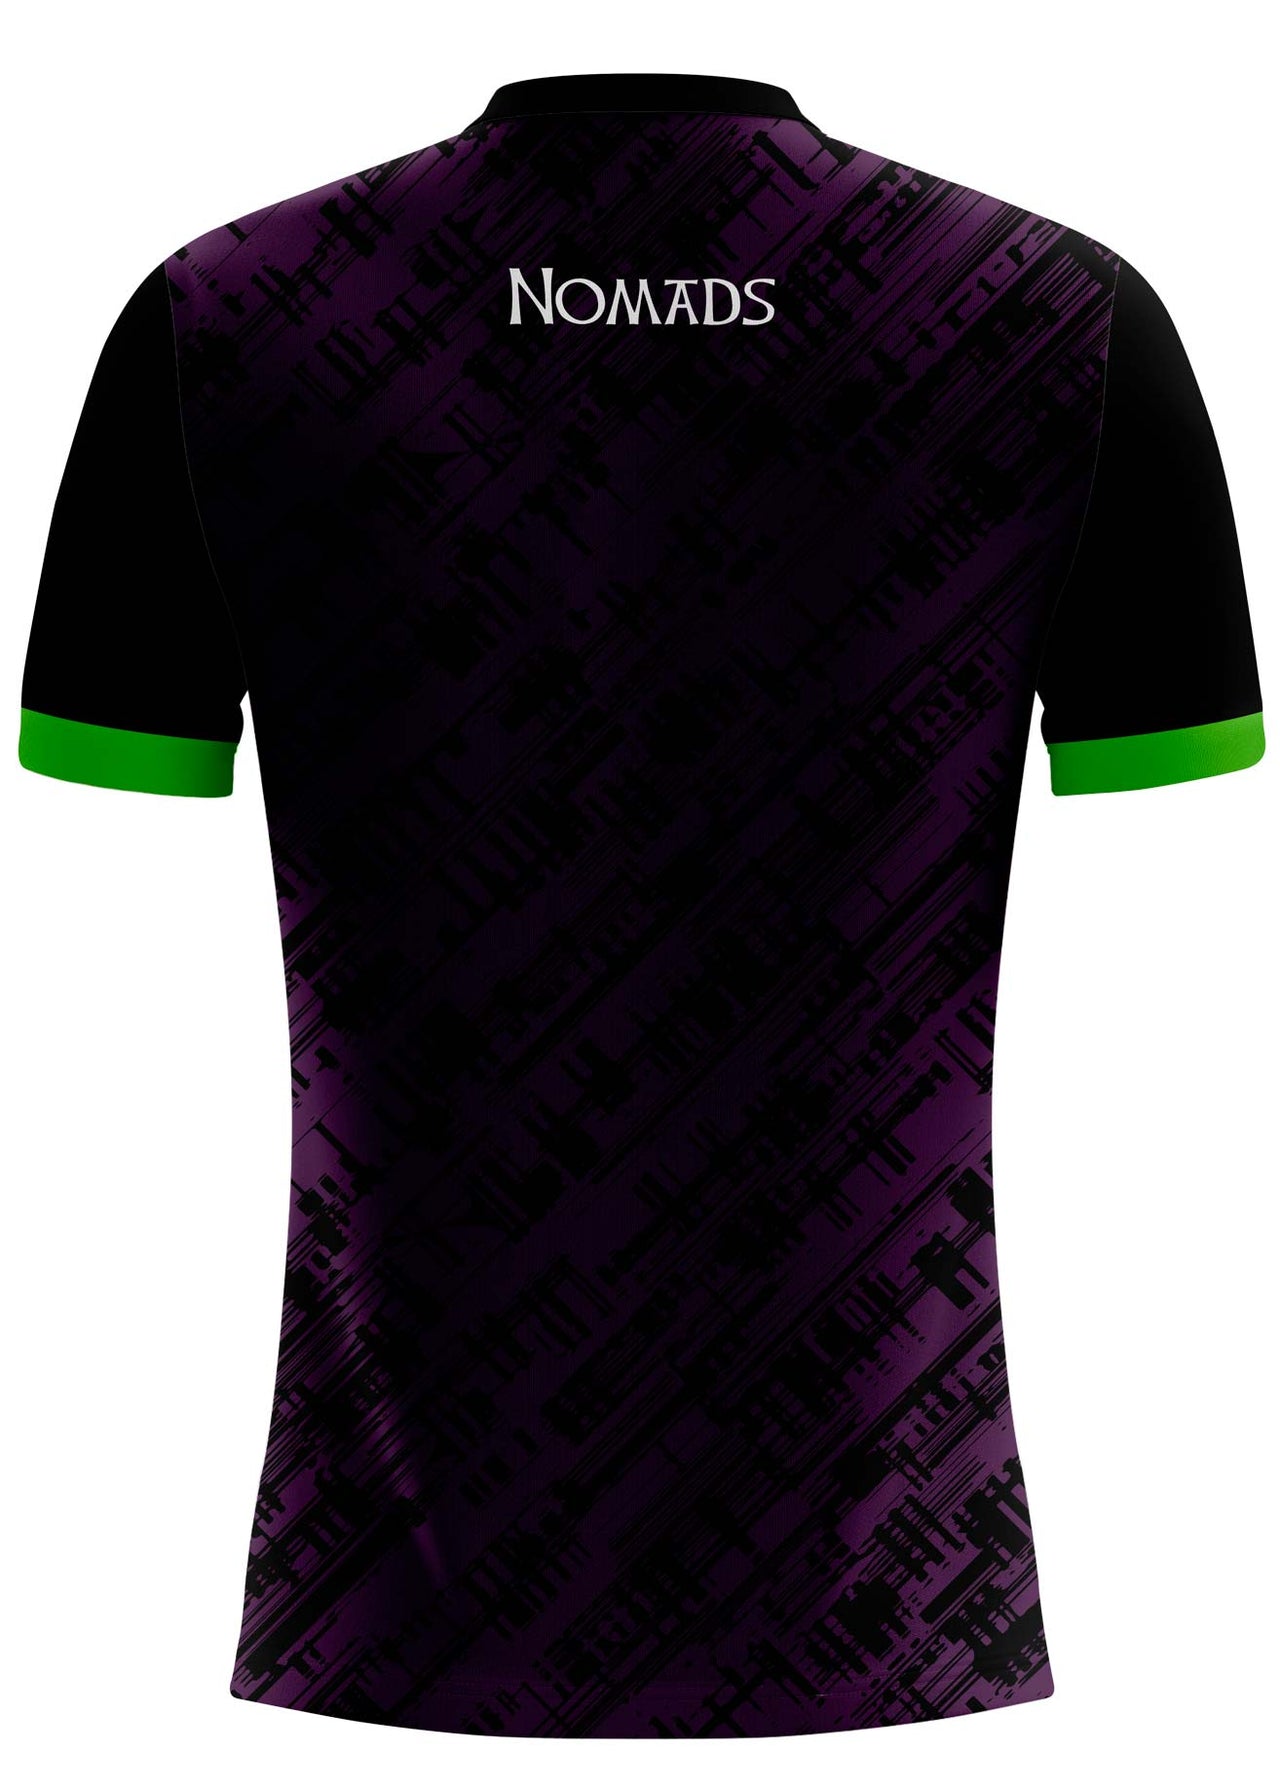 Willamette Valley Nomads Training Jersey Player Fit Adult